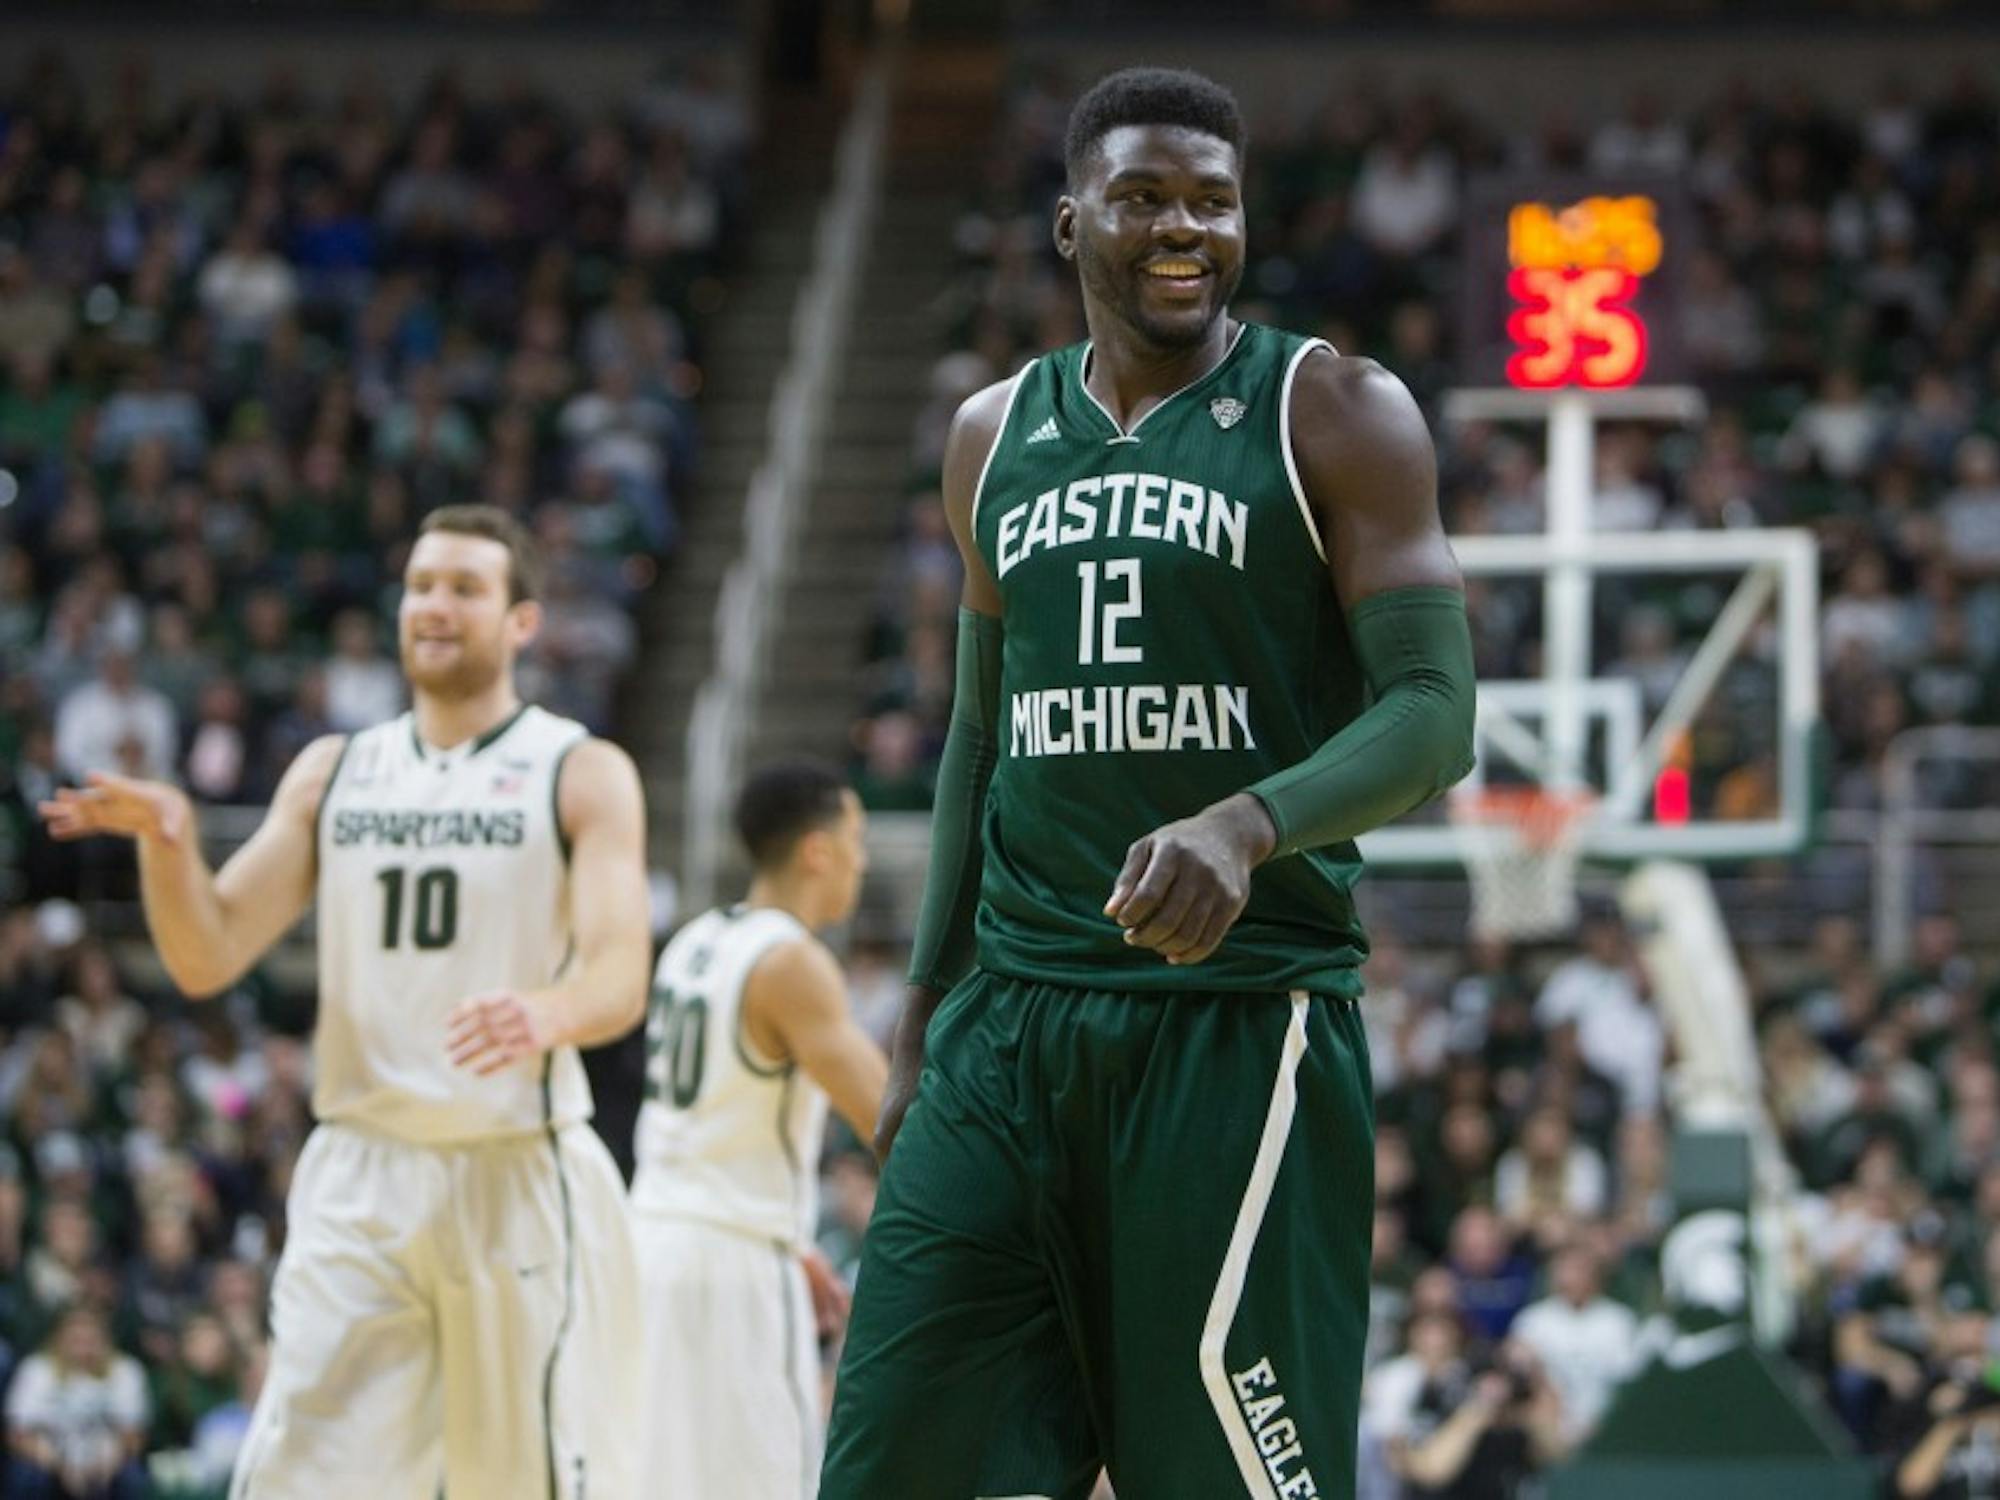 Eastern Michigan center Lekan Ajayi smiles at the bench after drawing a charge in their 66-46 loss to Michigan State in East Lansing Wednesday night.